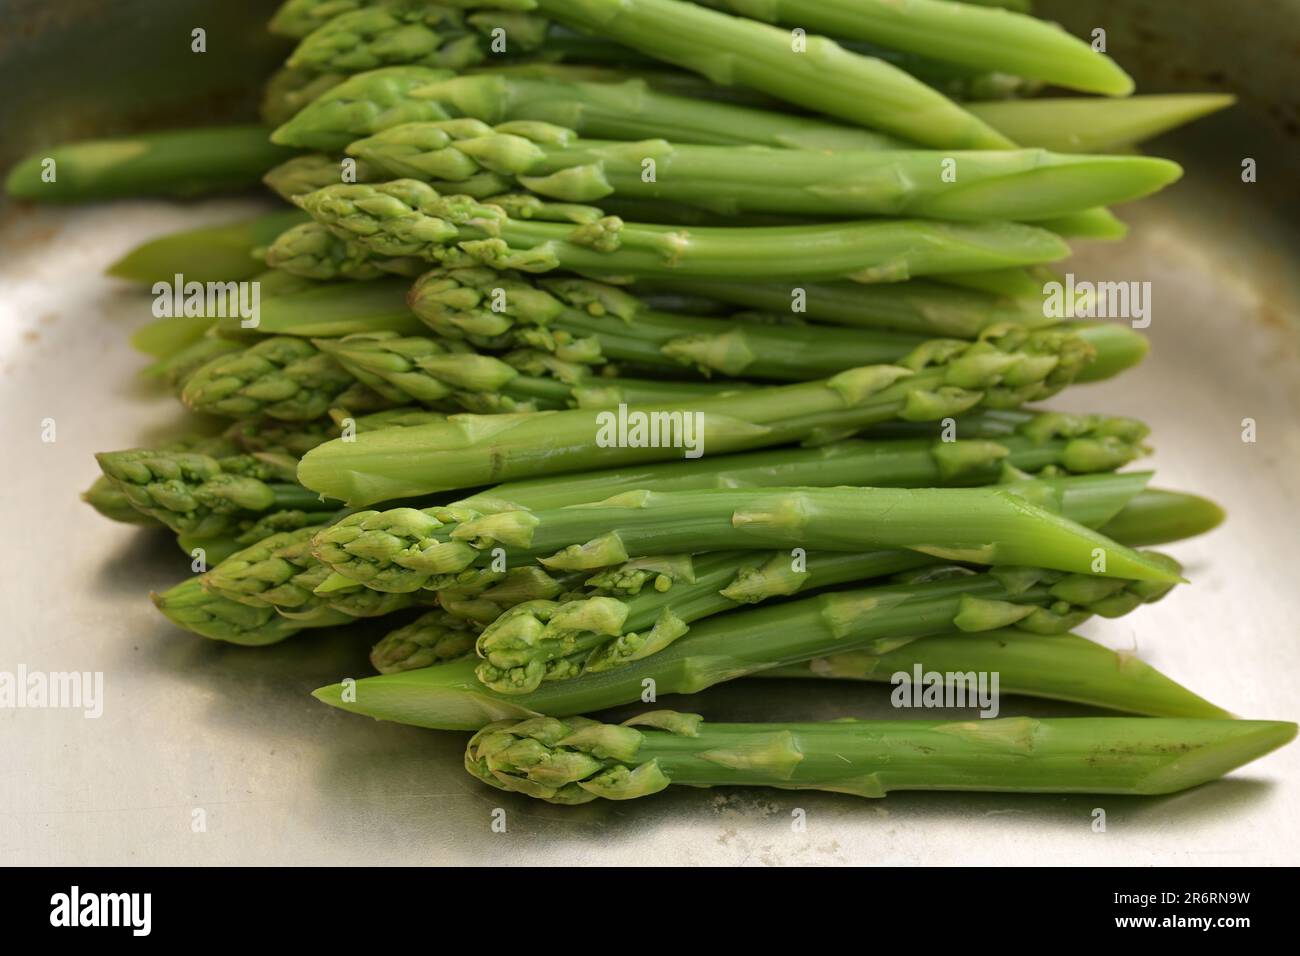 Blanched green asparagus in a metal container, cooking with seasonal healthy vegetables, selected focus, narrow depth of field Stock Photo